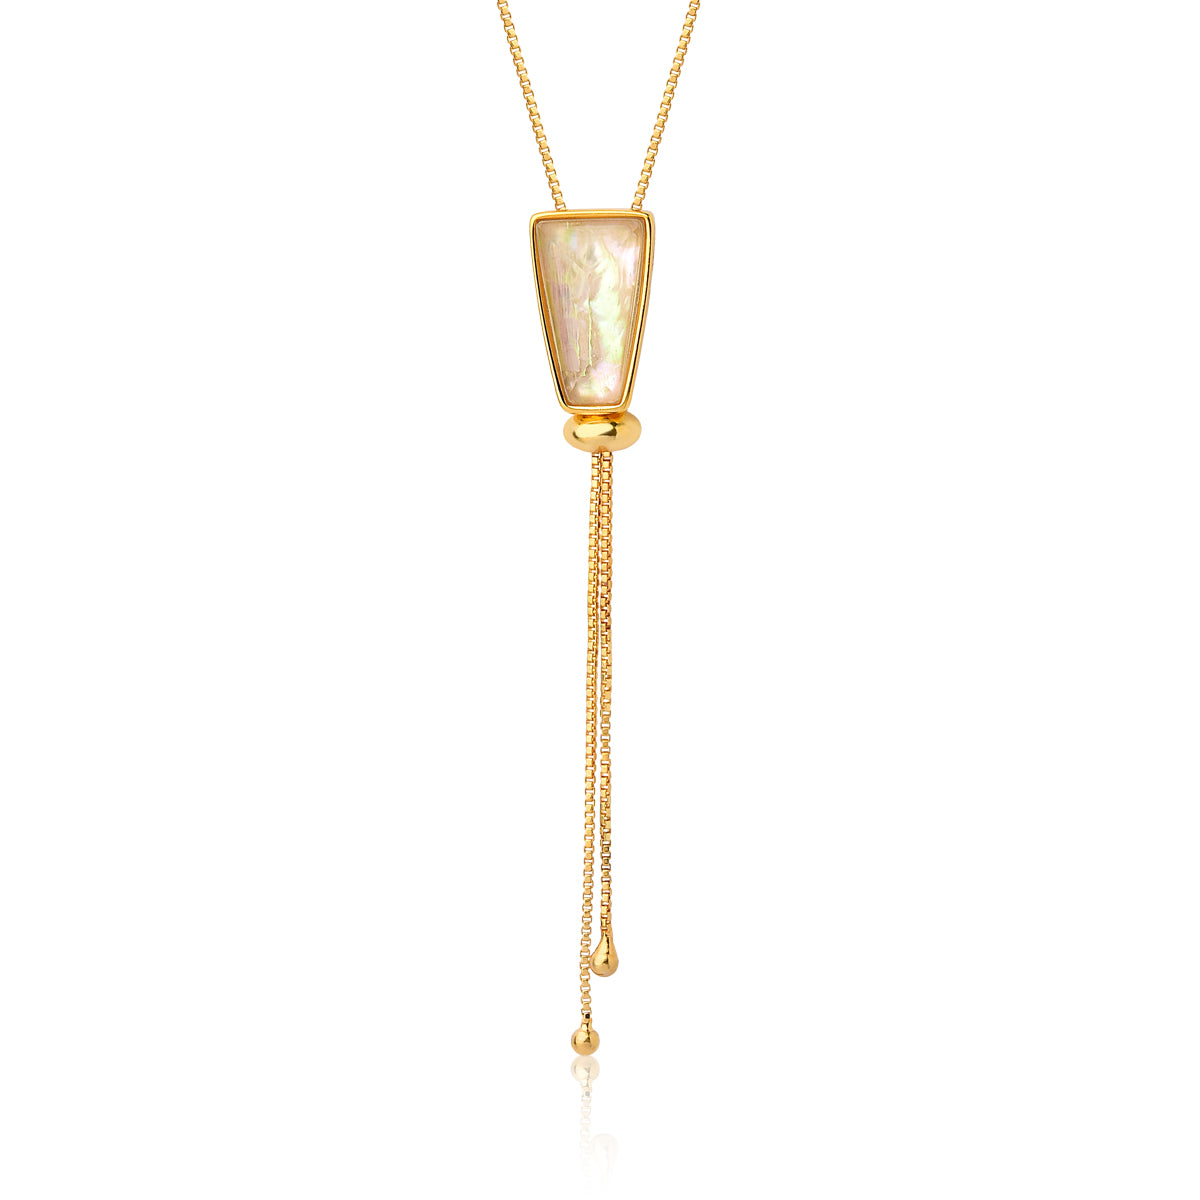 Adjustable Lariat Slider Necklace in Nautilus Shell | Gold Plated